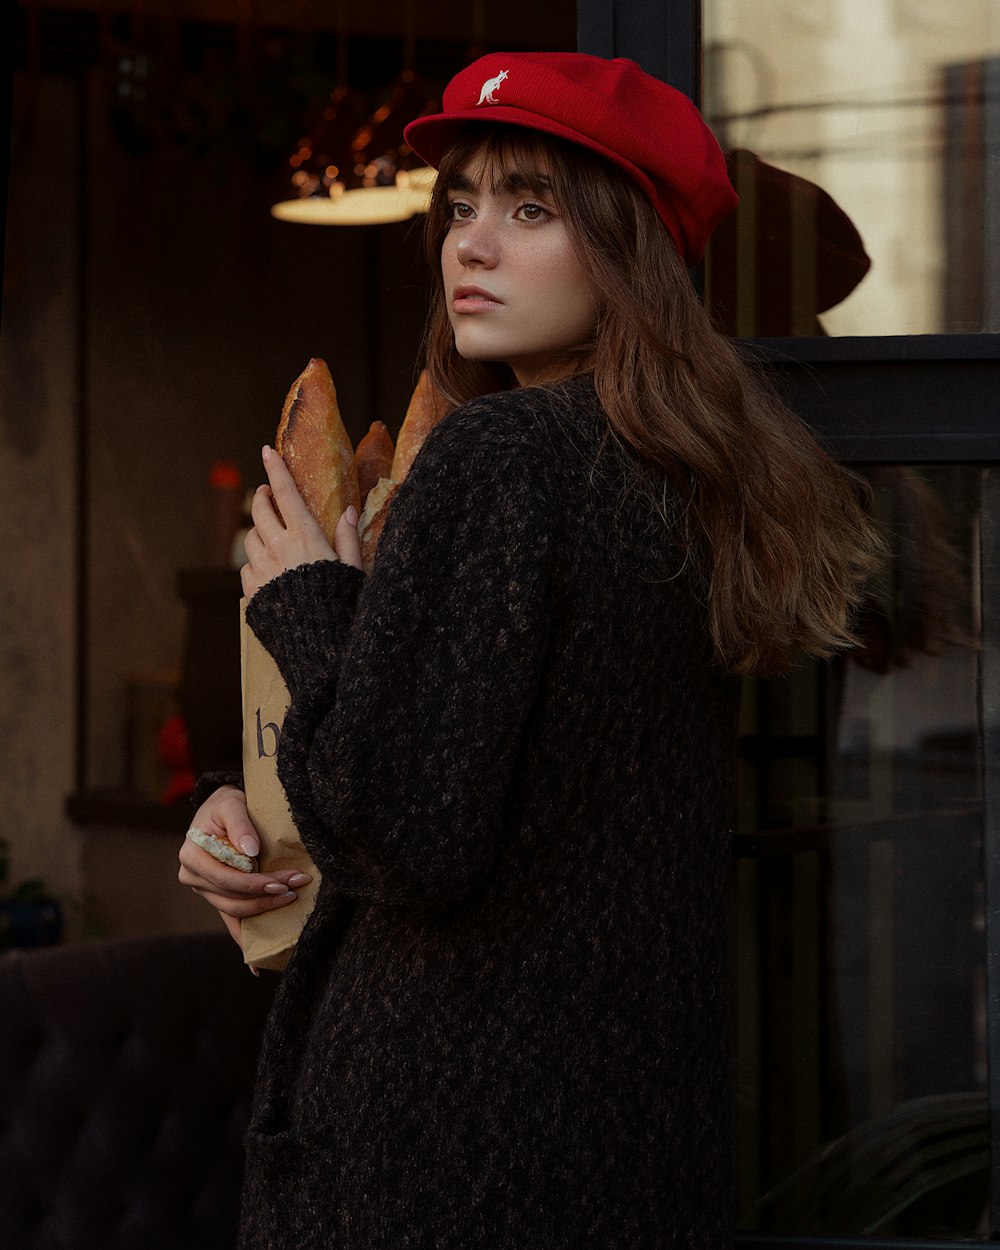 a woman in a red hat is holding a sandwich